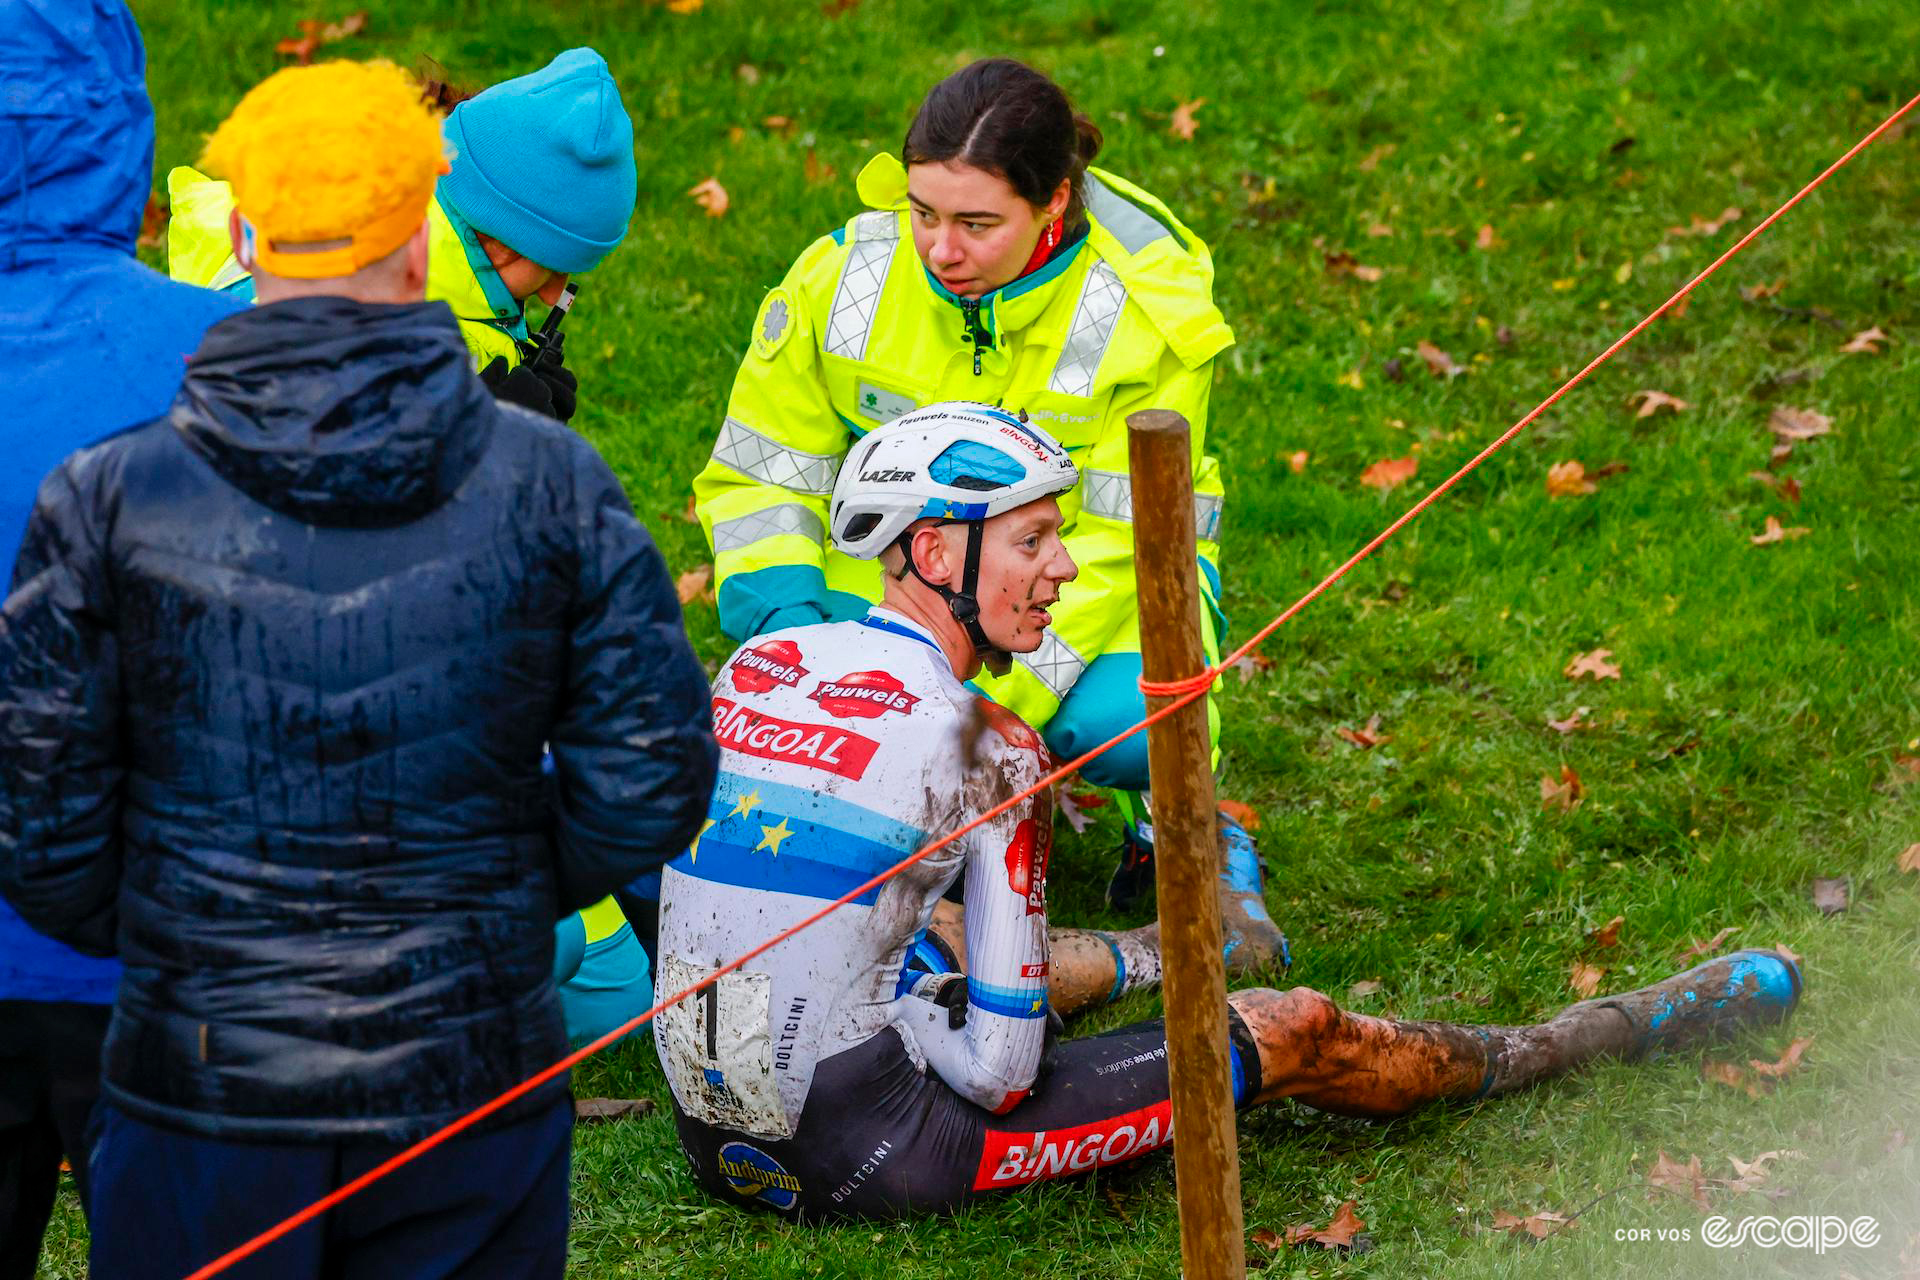 European champion Michael Vanthourenhout, splattered with wet mud, sits on the grass just off the course after crashing out of the lead of X20 Trofee Kortrijk, as two paramedics assess his dislocated shoulder.